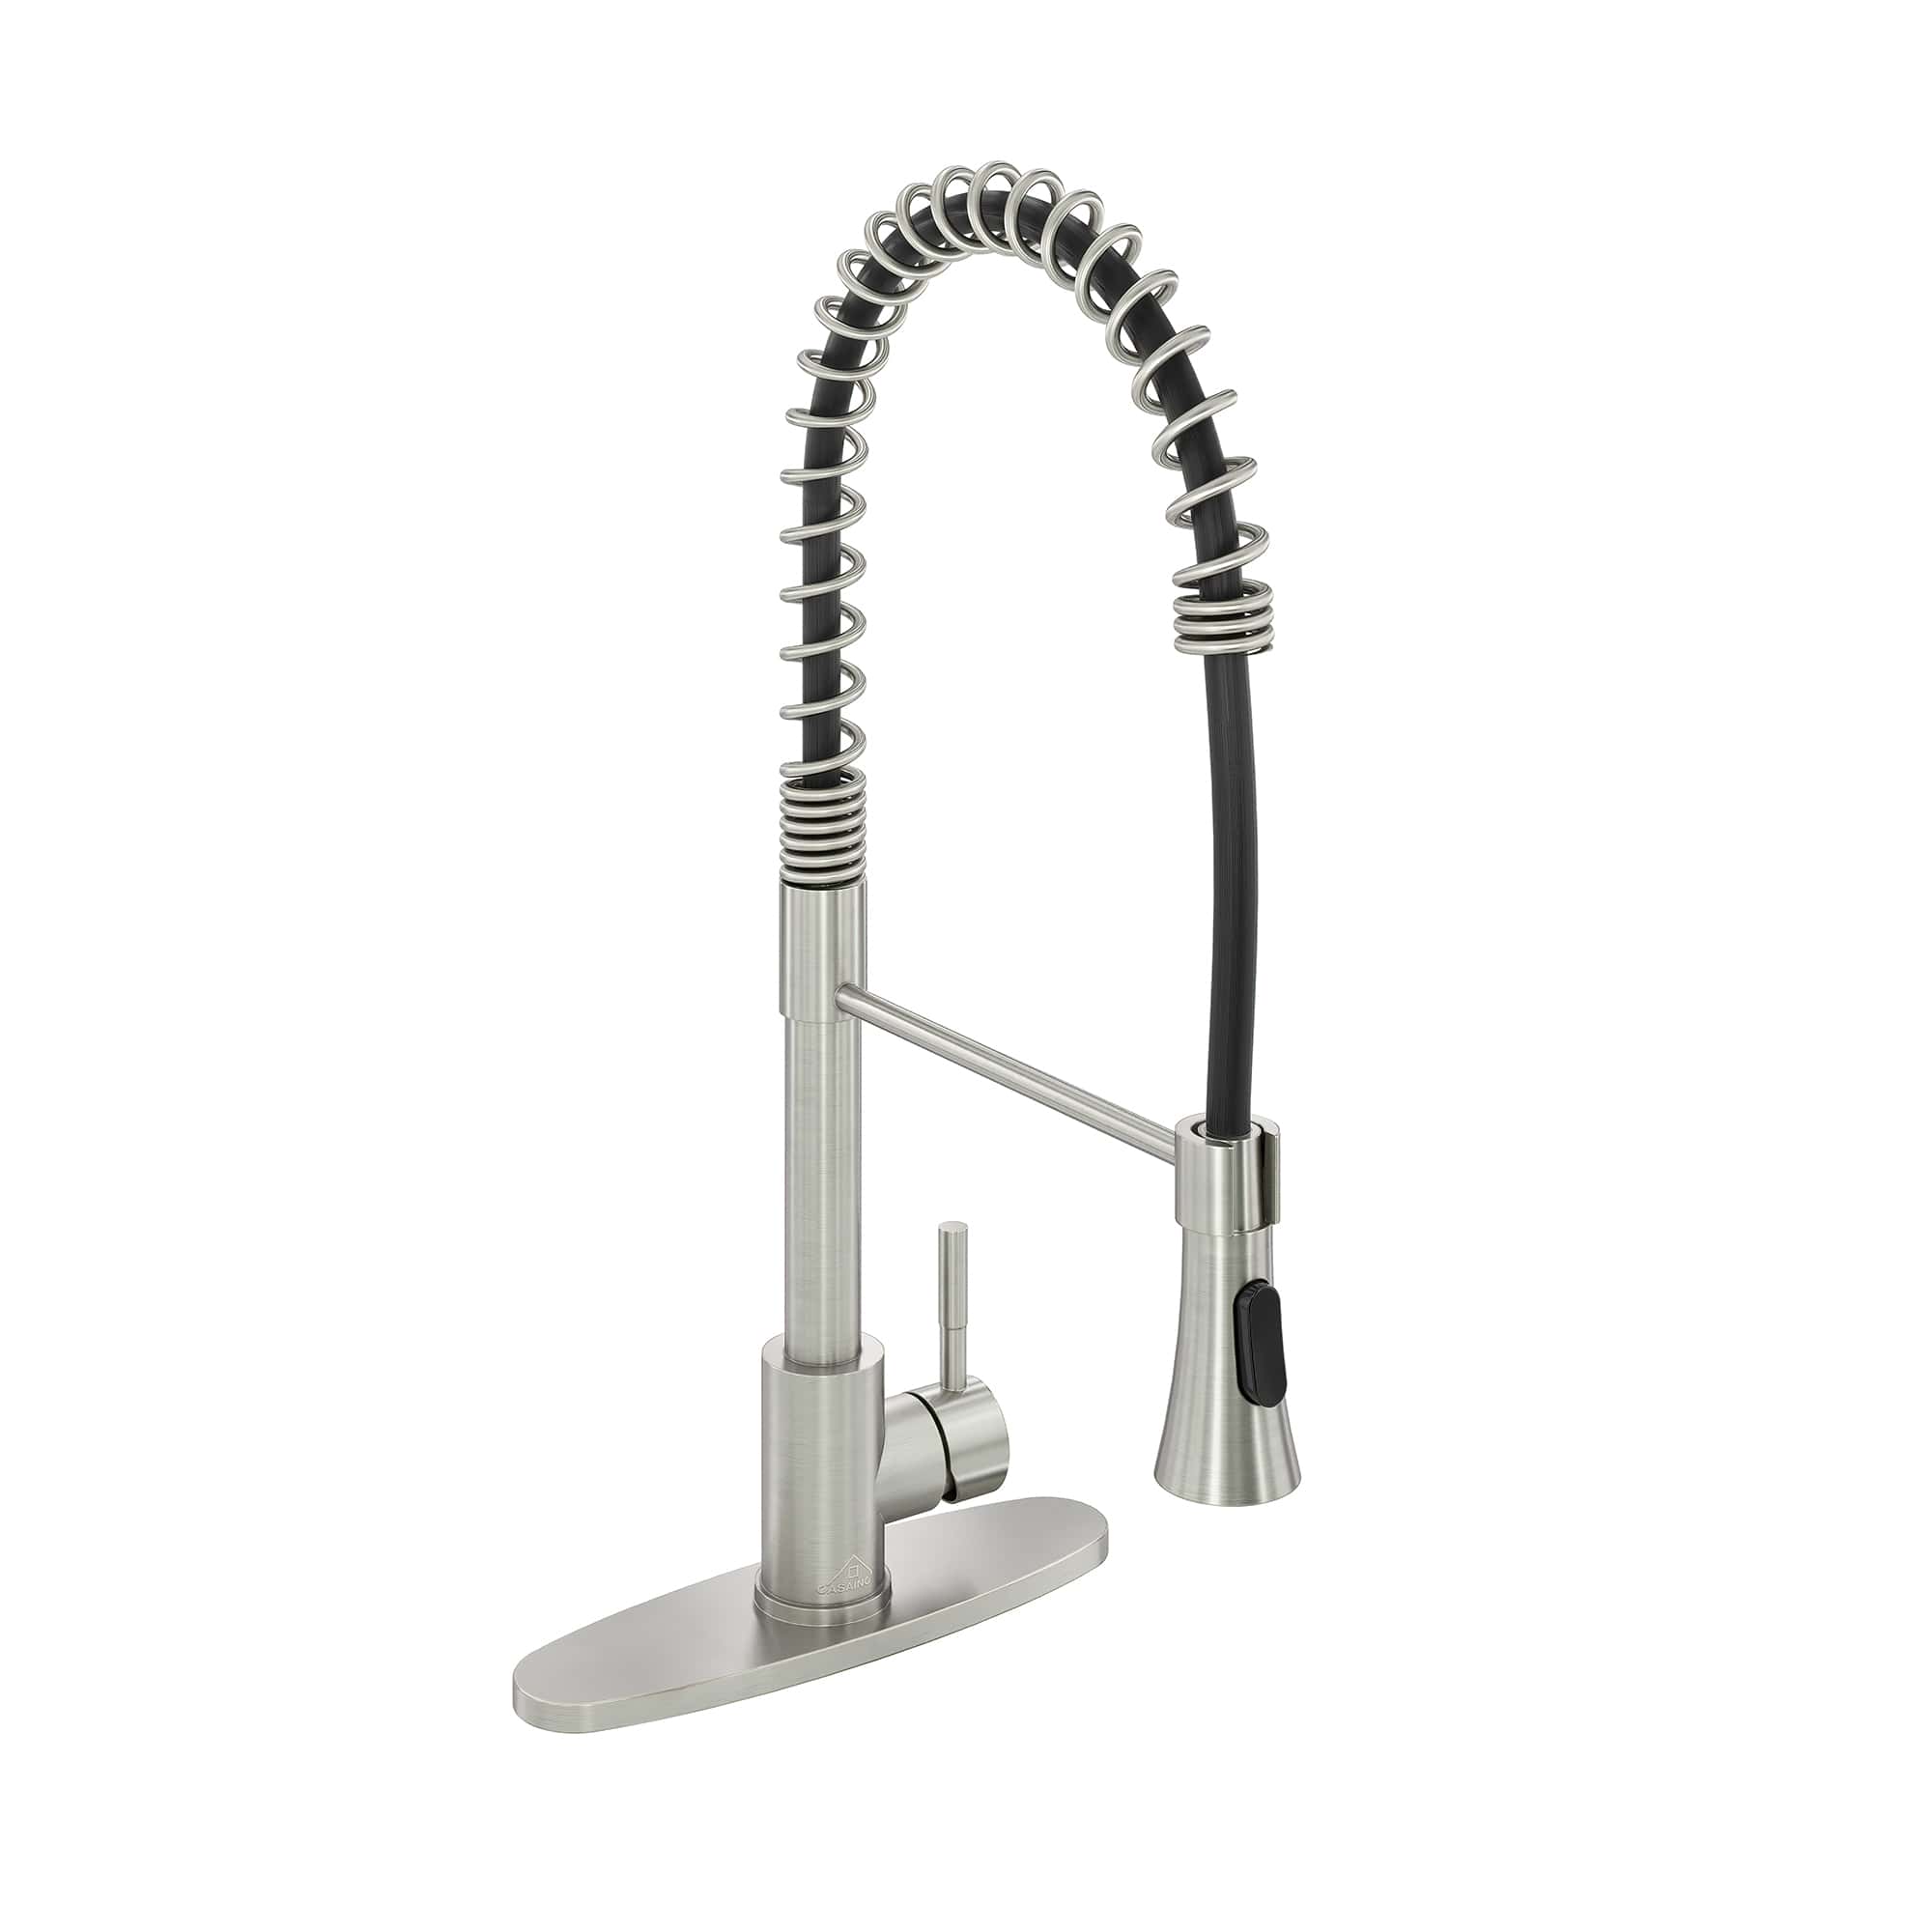 CASAINC 1.8GPM non-pull kitchen faucet in Matte Black and More